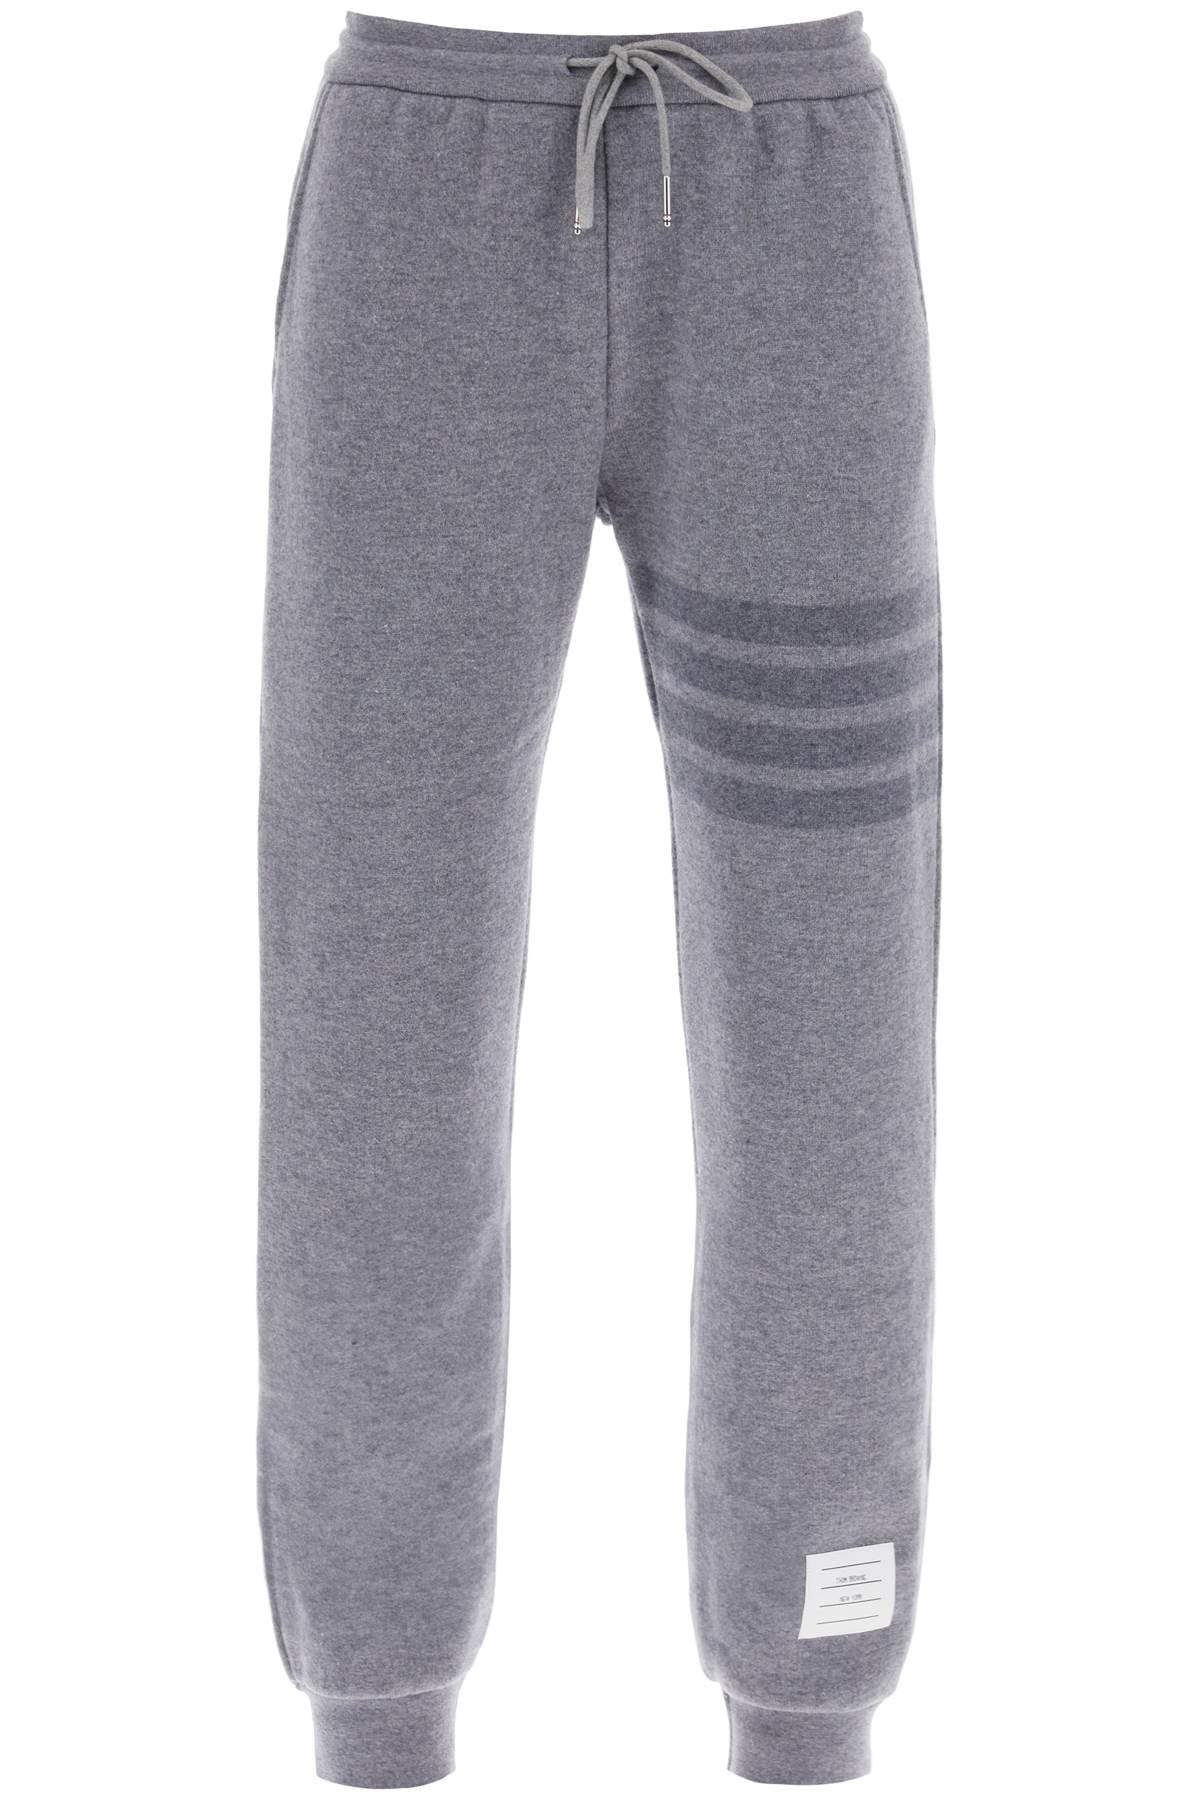 Thom browne knitted joggers with 4-bar motif-0